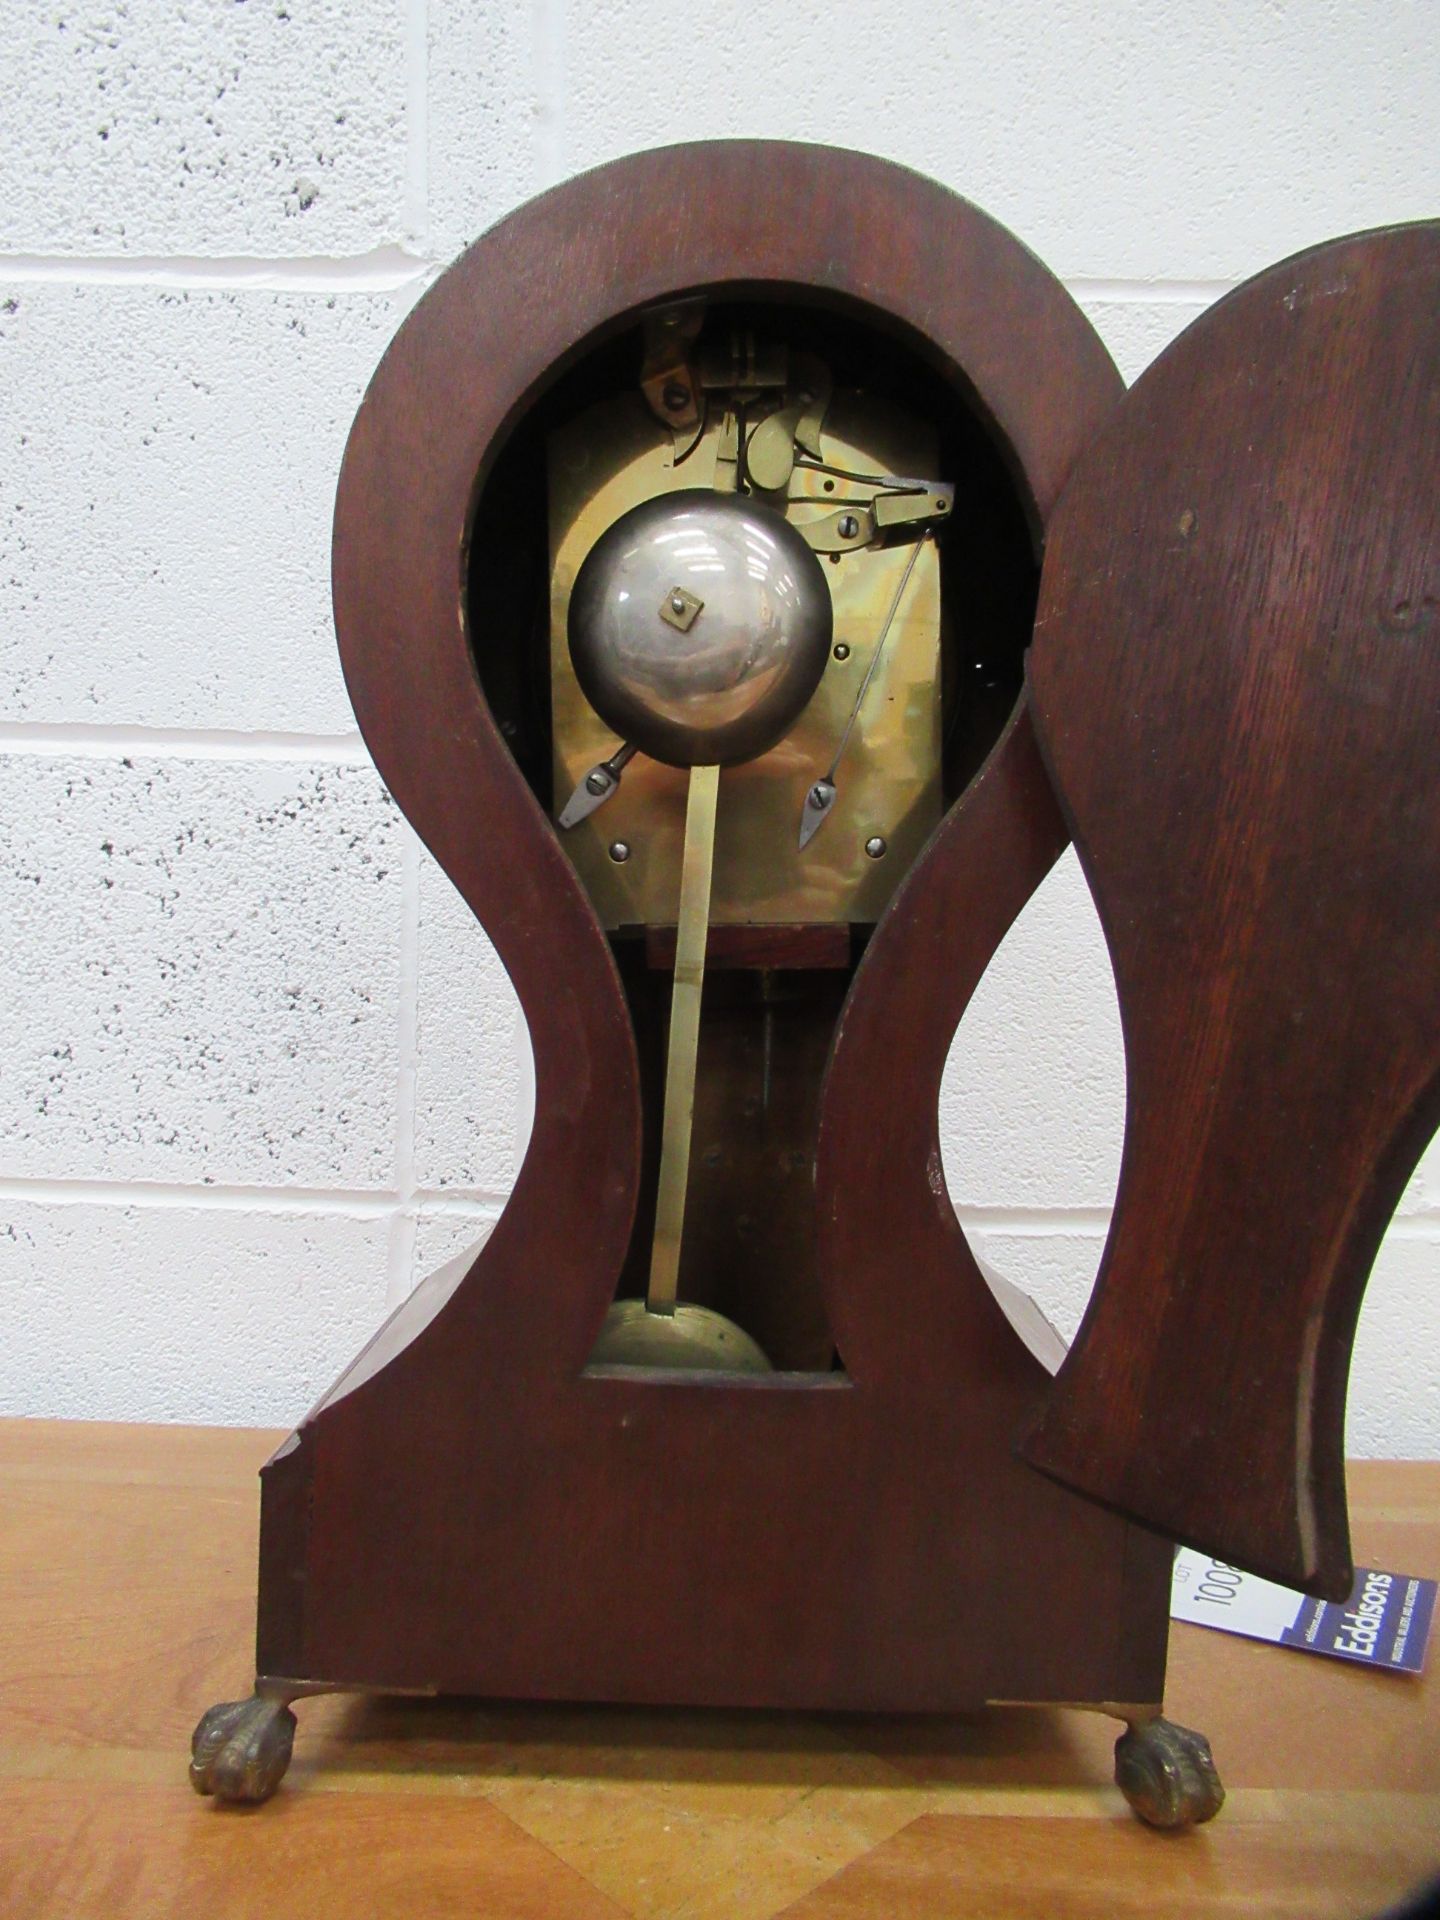 Wooden Balloon Clock with 'R Thompson & Son-London' Engraved to Clock Face - Image 6 of 6